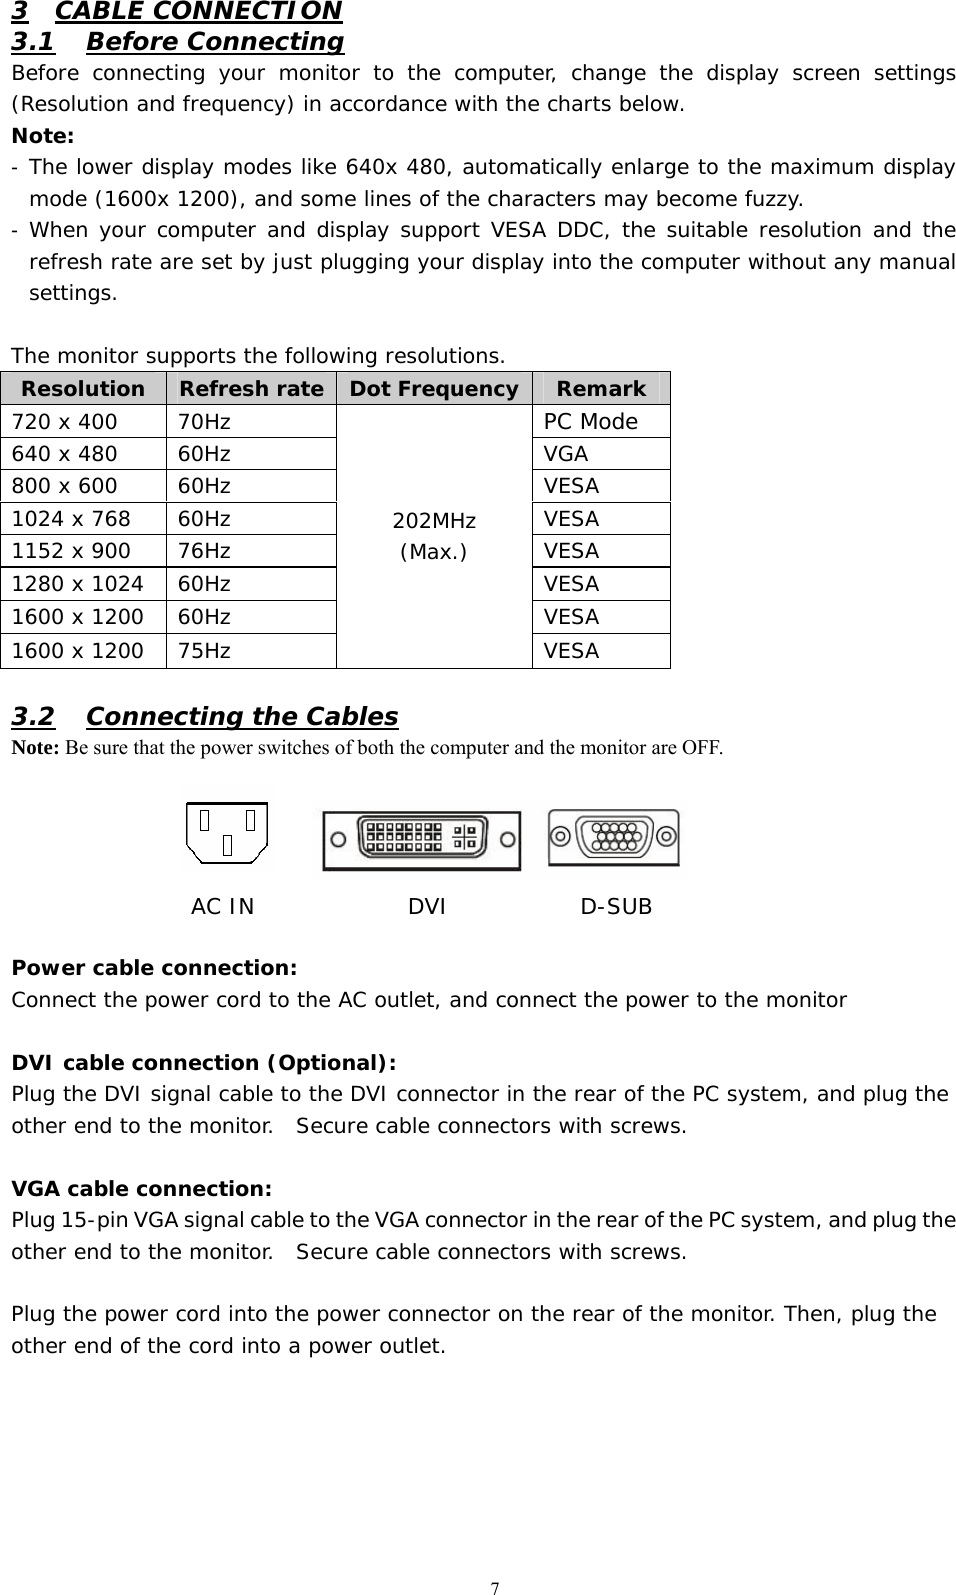   7 3 CABLE CONNECTION 3.1 Before Connecting Before connecting your monitor to the computer, change the display screen settings (Resolution and frequency) in accordance with the charts below.  Note: -  The lower display modes like 640x 480, automatically enlarge to the maximum display mode (1600x 1200), and some lines of the characters may become fuzzy.  -  When your computer and display support VESA DDC, the suitable resolution and the refresh rate are set by just plugging your display into the computer without any manual settings.   The monitor supports the following resolutions.         3.2 Connecting the Cables Note: Be sure that the power switches of both the computer and the monitor are OFF.          Power cable connection: Connect the power cord to the AC outlet, and connect the power to the monitor  DVI cable connection (Optional): Plug the DVI signal cable to the DVI connector in the rear of the PC system, and plug the other end to the monitor.  Secure cable connectors with screws.  VGA cable connection: Plug 15-pin VGA signal cable to the VGA connector in the rear of the PC system, and plug the other end to the monitor.  Secure cable connectors with screws.  Plug the power cord into the power connector on the rear of the monitor. Then, plug the other end of the cord into a power outlet. Resolution  Refresh rate  Dot Frequency Remark 720 x 400  70Hz  PC Mode 640 x 480  60Hz  VGA 800 x 600  60Hz  VESA 1024 x 768  60Hz  VESA 1152 x 900  76Hz  VESA 1280 x 1024  60Hz  VESA 1600 x 1200  60Hz  VESA 1600 x 1200  75Hz 202MHz (Max.) VESA AC IN              DVI            D-SUB       